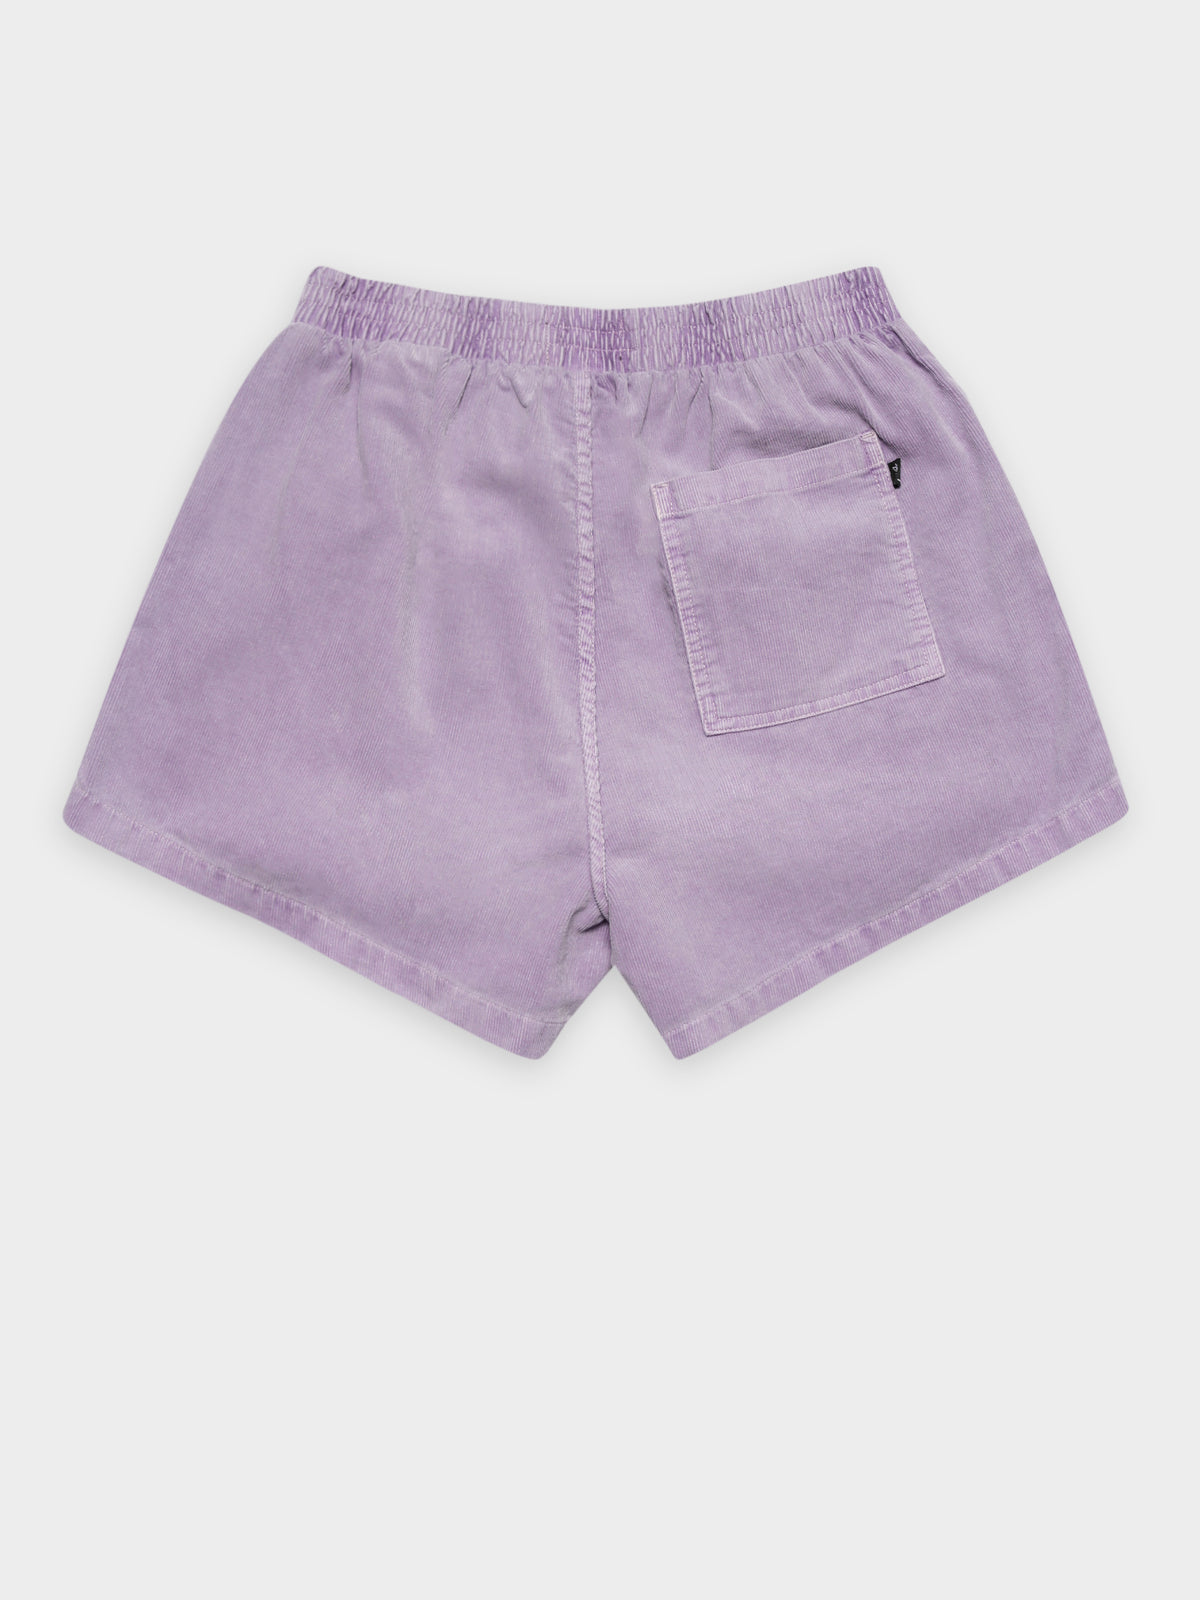 Stock Cord Shorts in Pastel Lilac